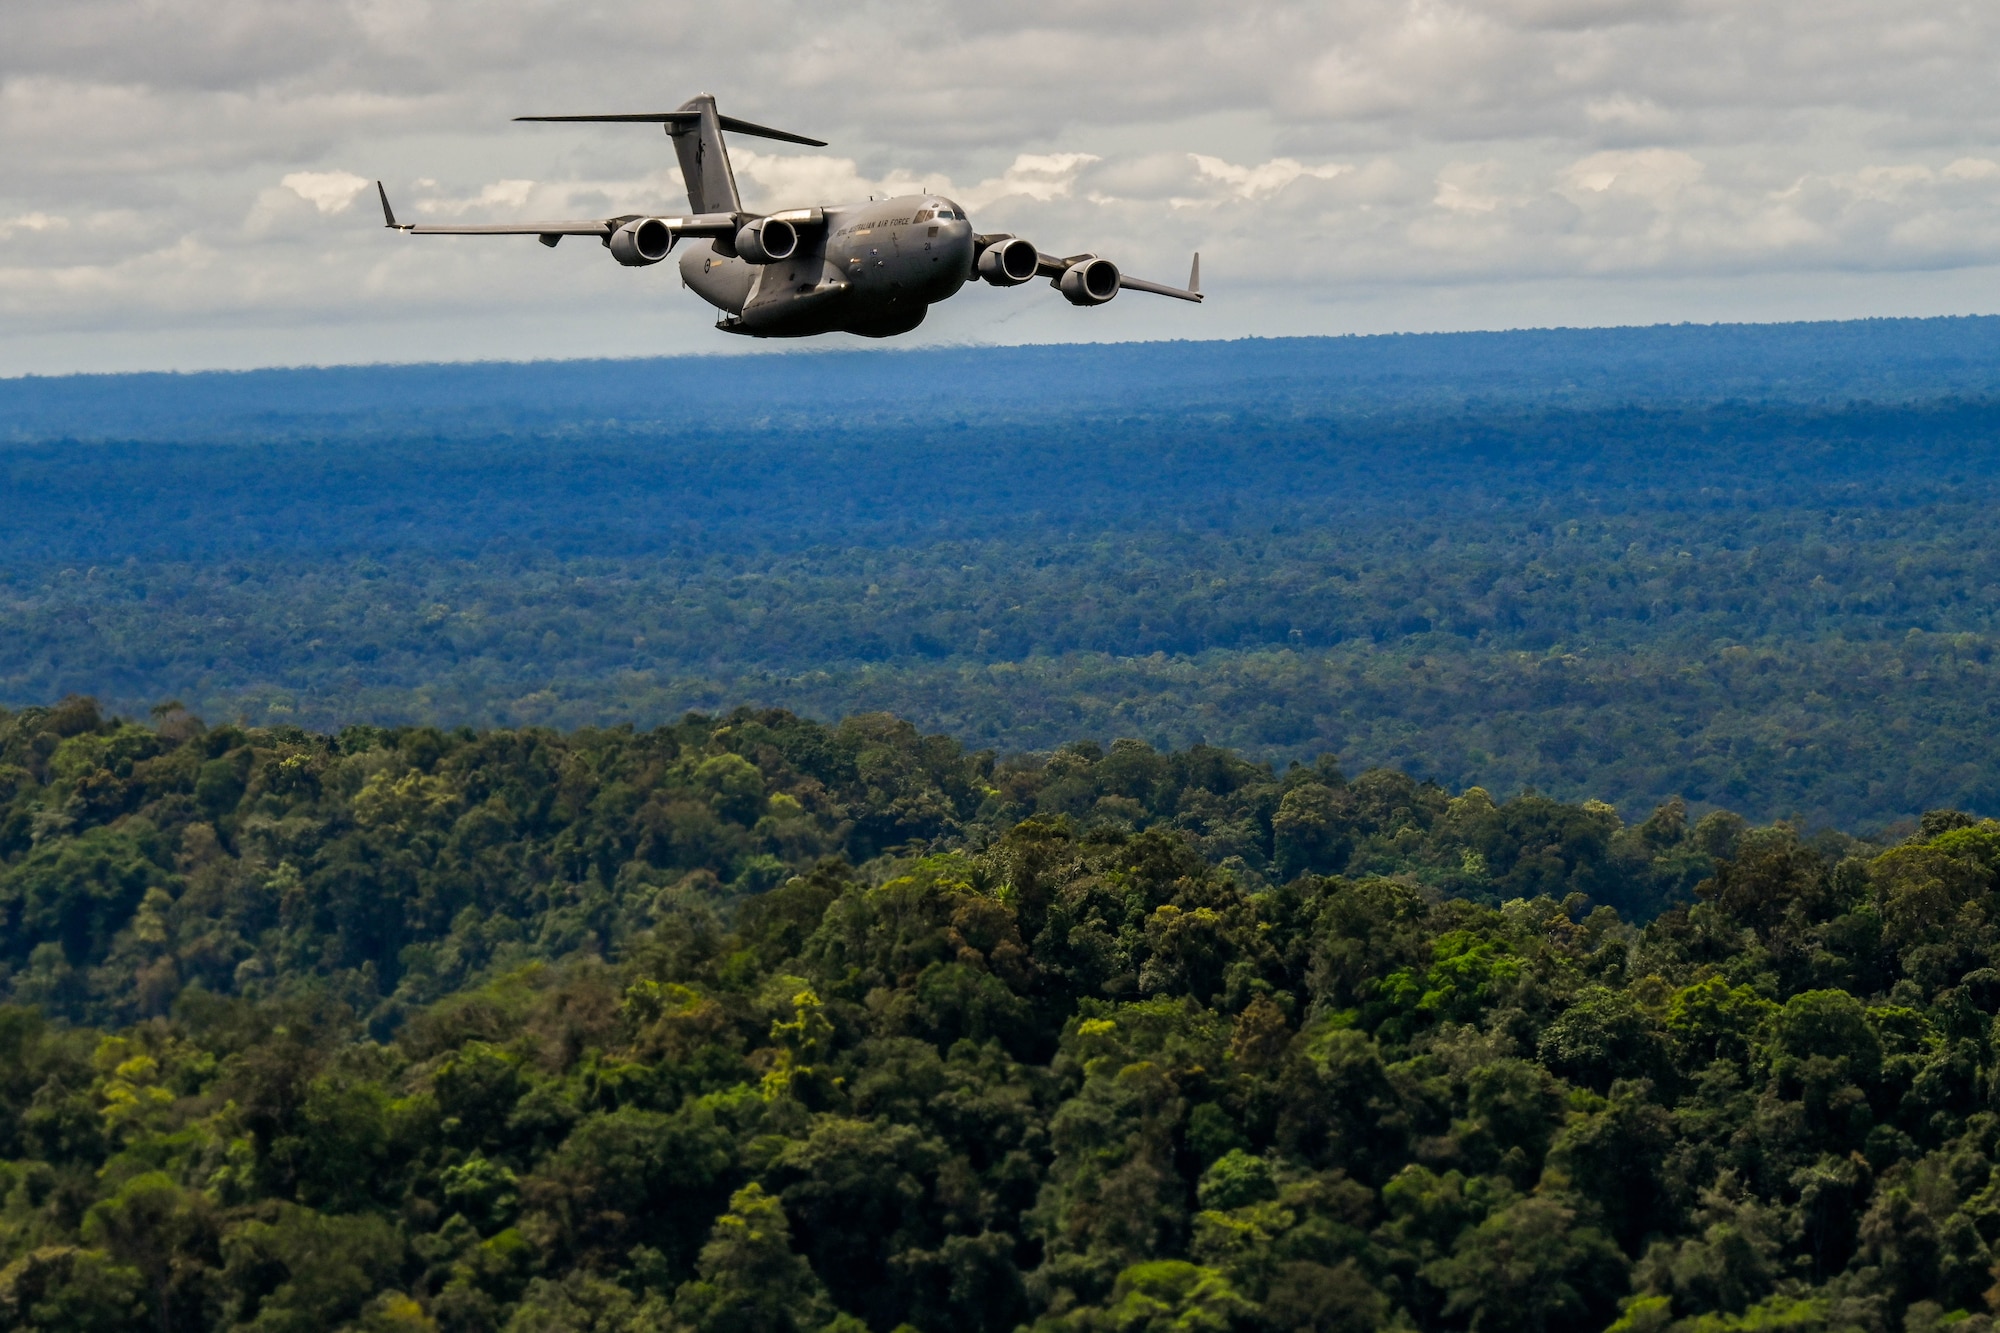 A Royal Australian Air Force C-17 Globemaster III flies in a training flight formation during Exercise Global Dexterity 23-24 around the skies of Papua New Guinea, Dec. 6, 2023. The exercise demonstrates the key partnership and interoperability between the U.S. and Australia that allows continued security and stability in the Indo-Pacific region. (U.S. Air Force photo by Senior Airman Makensie Cooper)